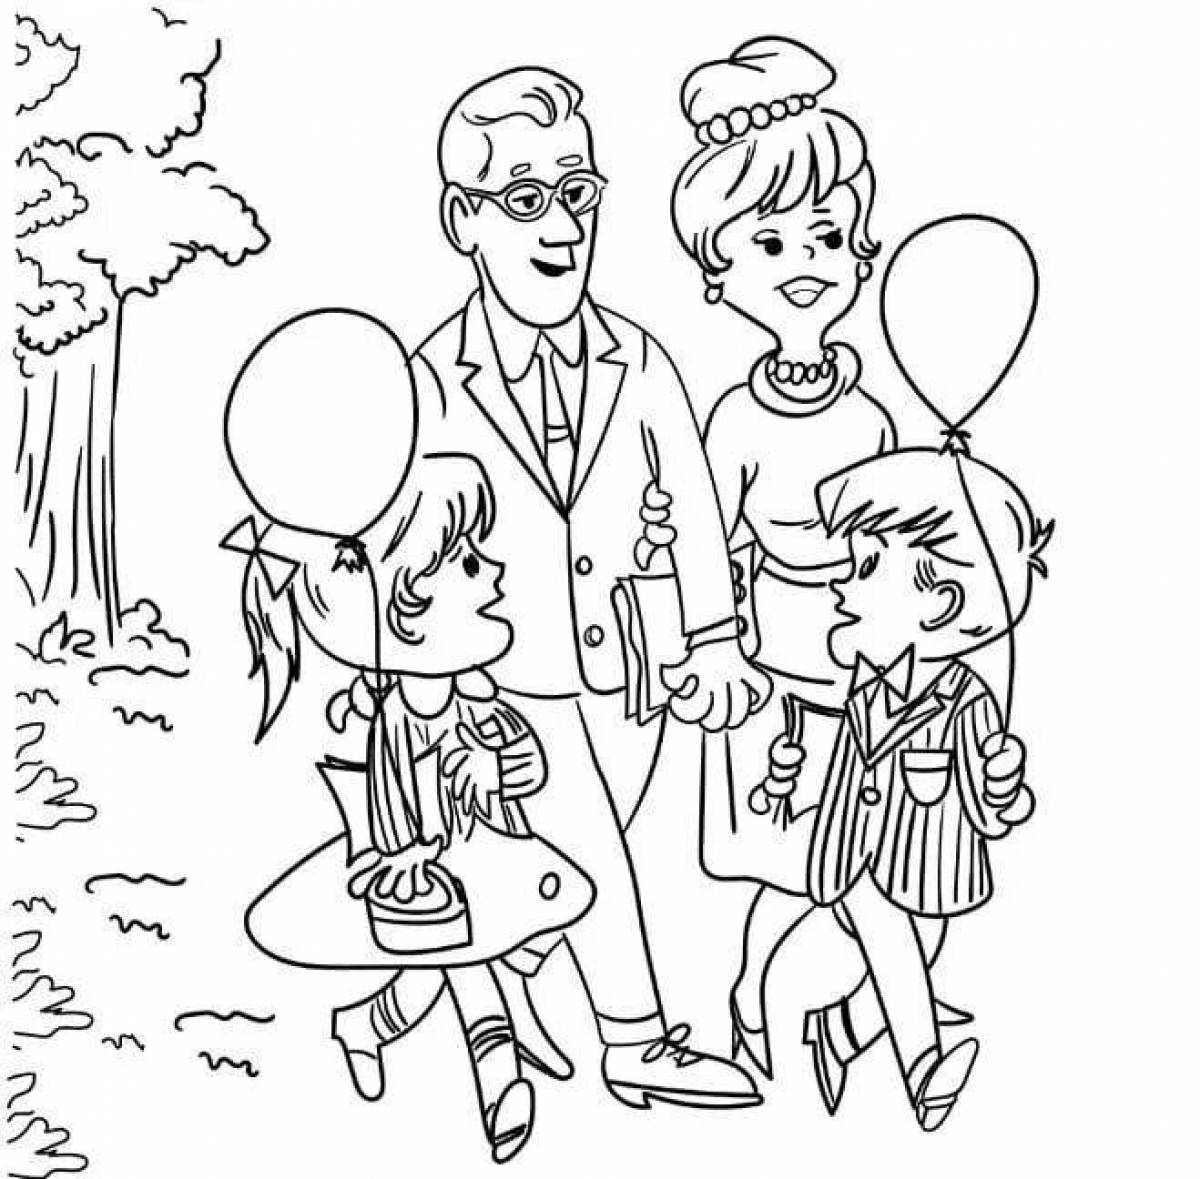 Loving family coloring book